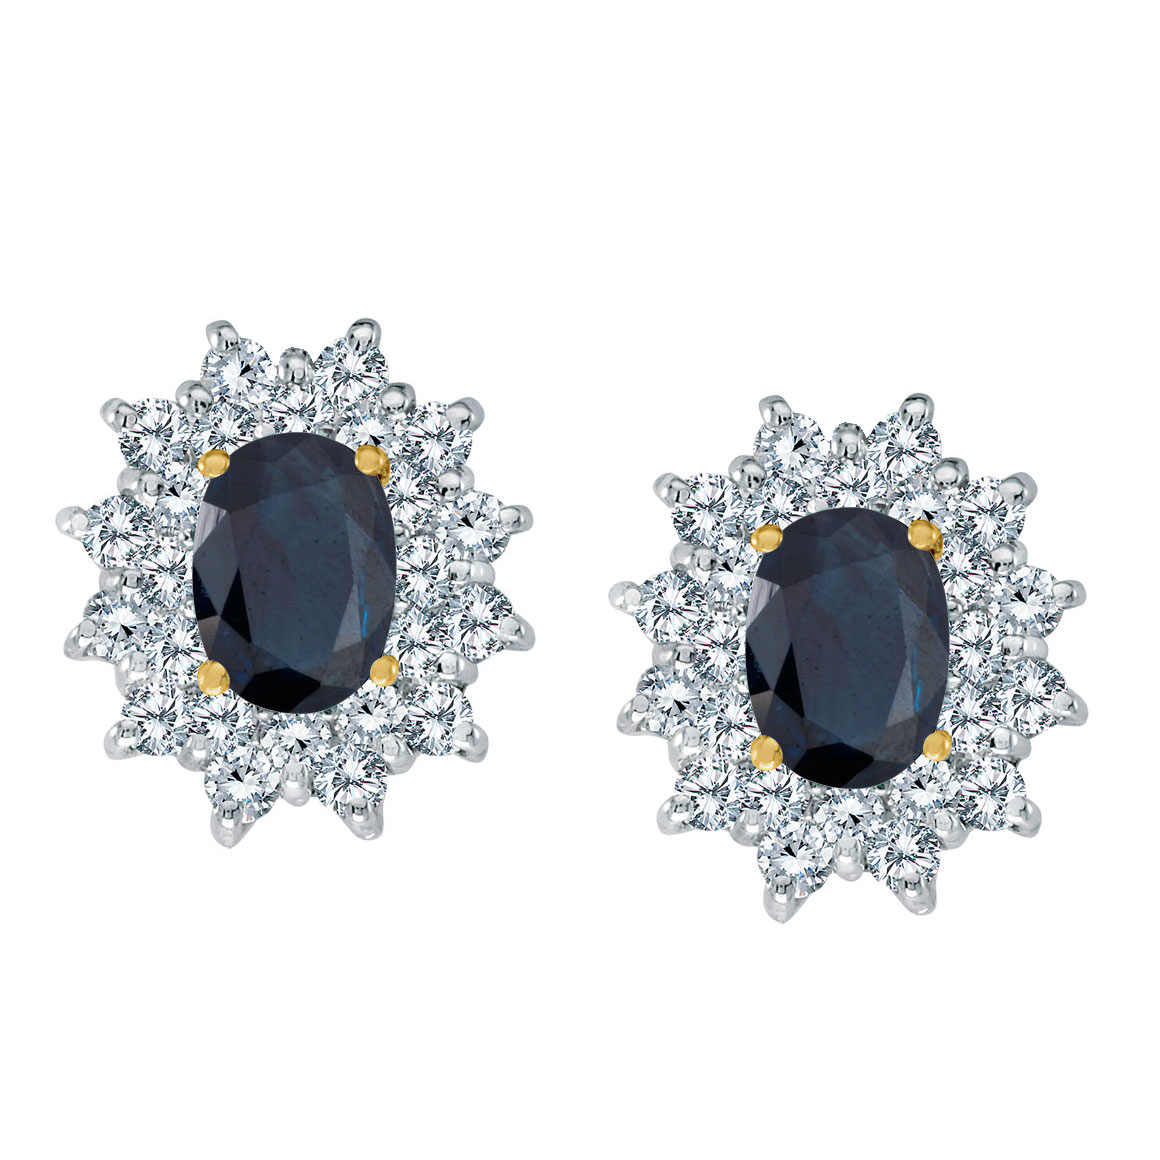 JCX2286: Bright 14k yellow gold earrings featuring 7x5 mm sapphires surrounded by 1.00 total carat of scintillating diamonds.